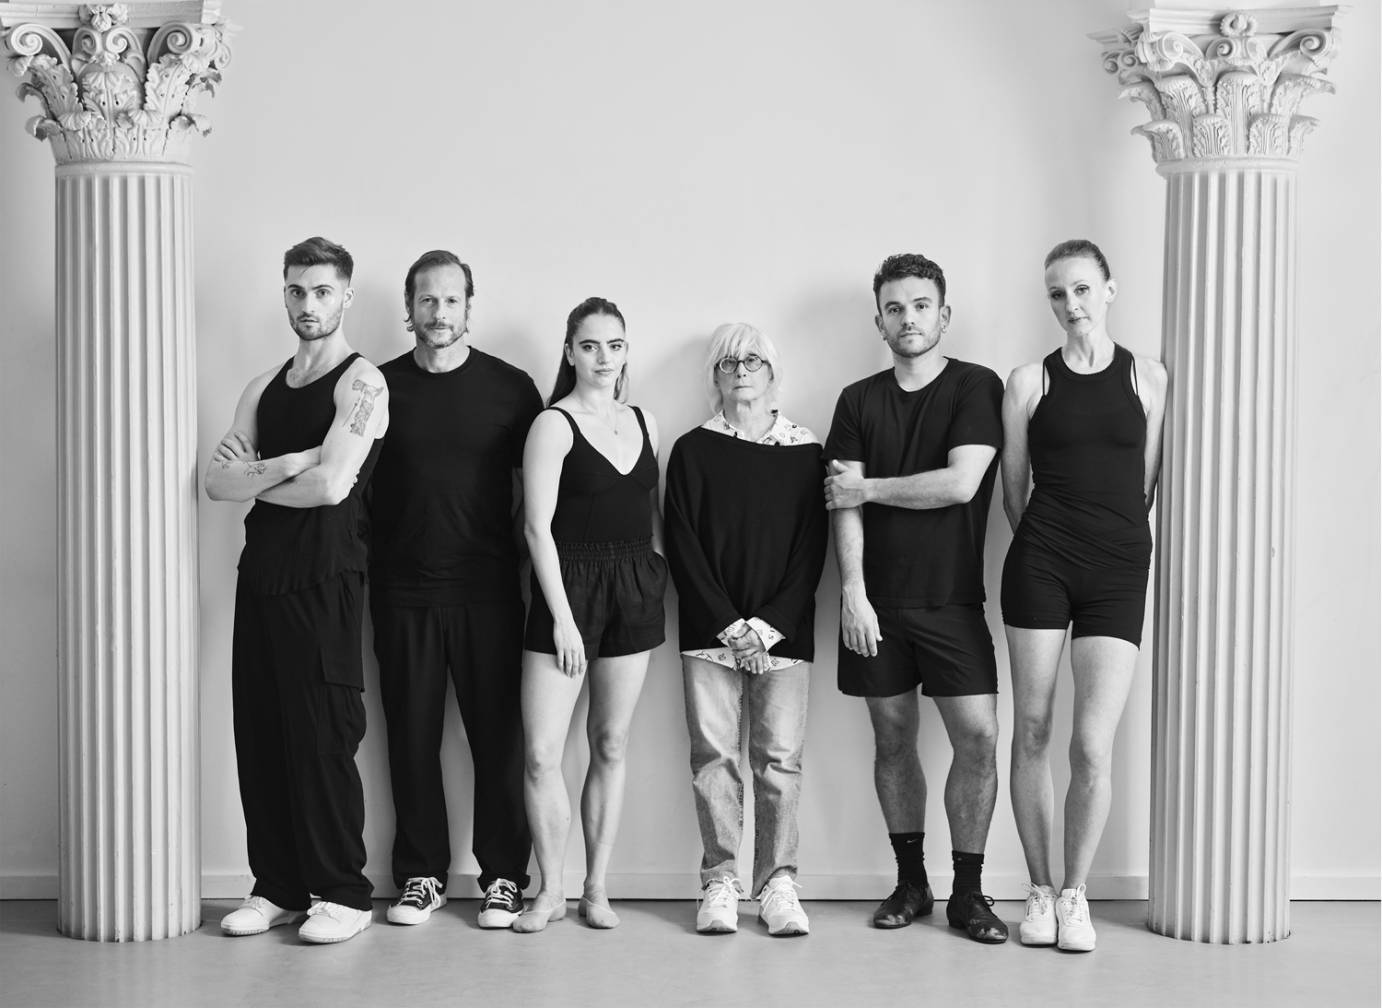 Black and white photo of Twyla Tharp and 5 dancers standing in a line between 2 ornate pillars